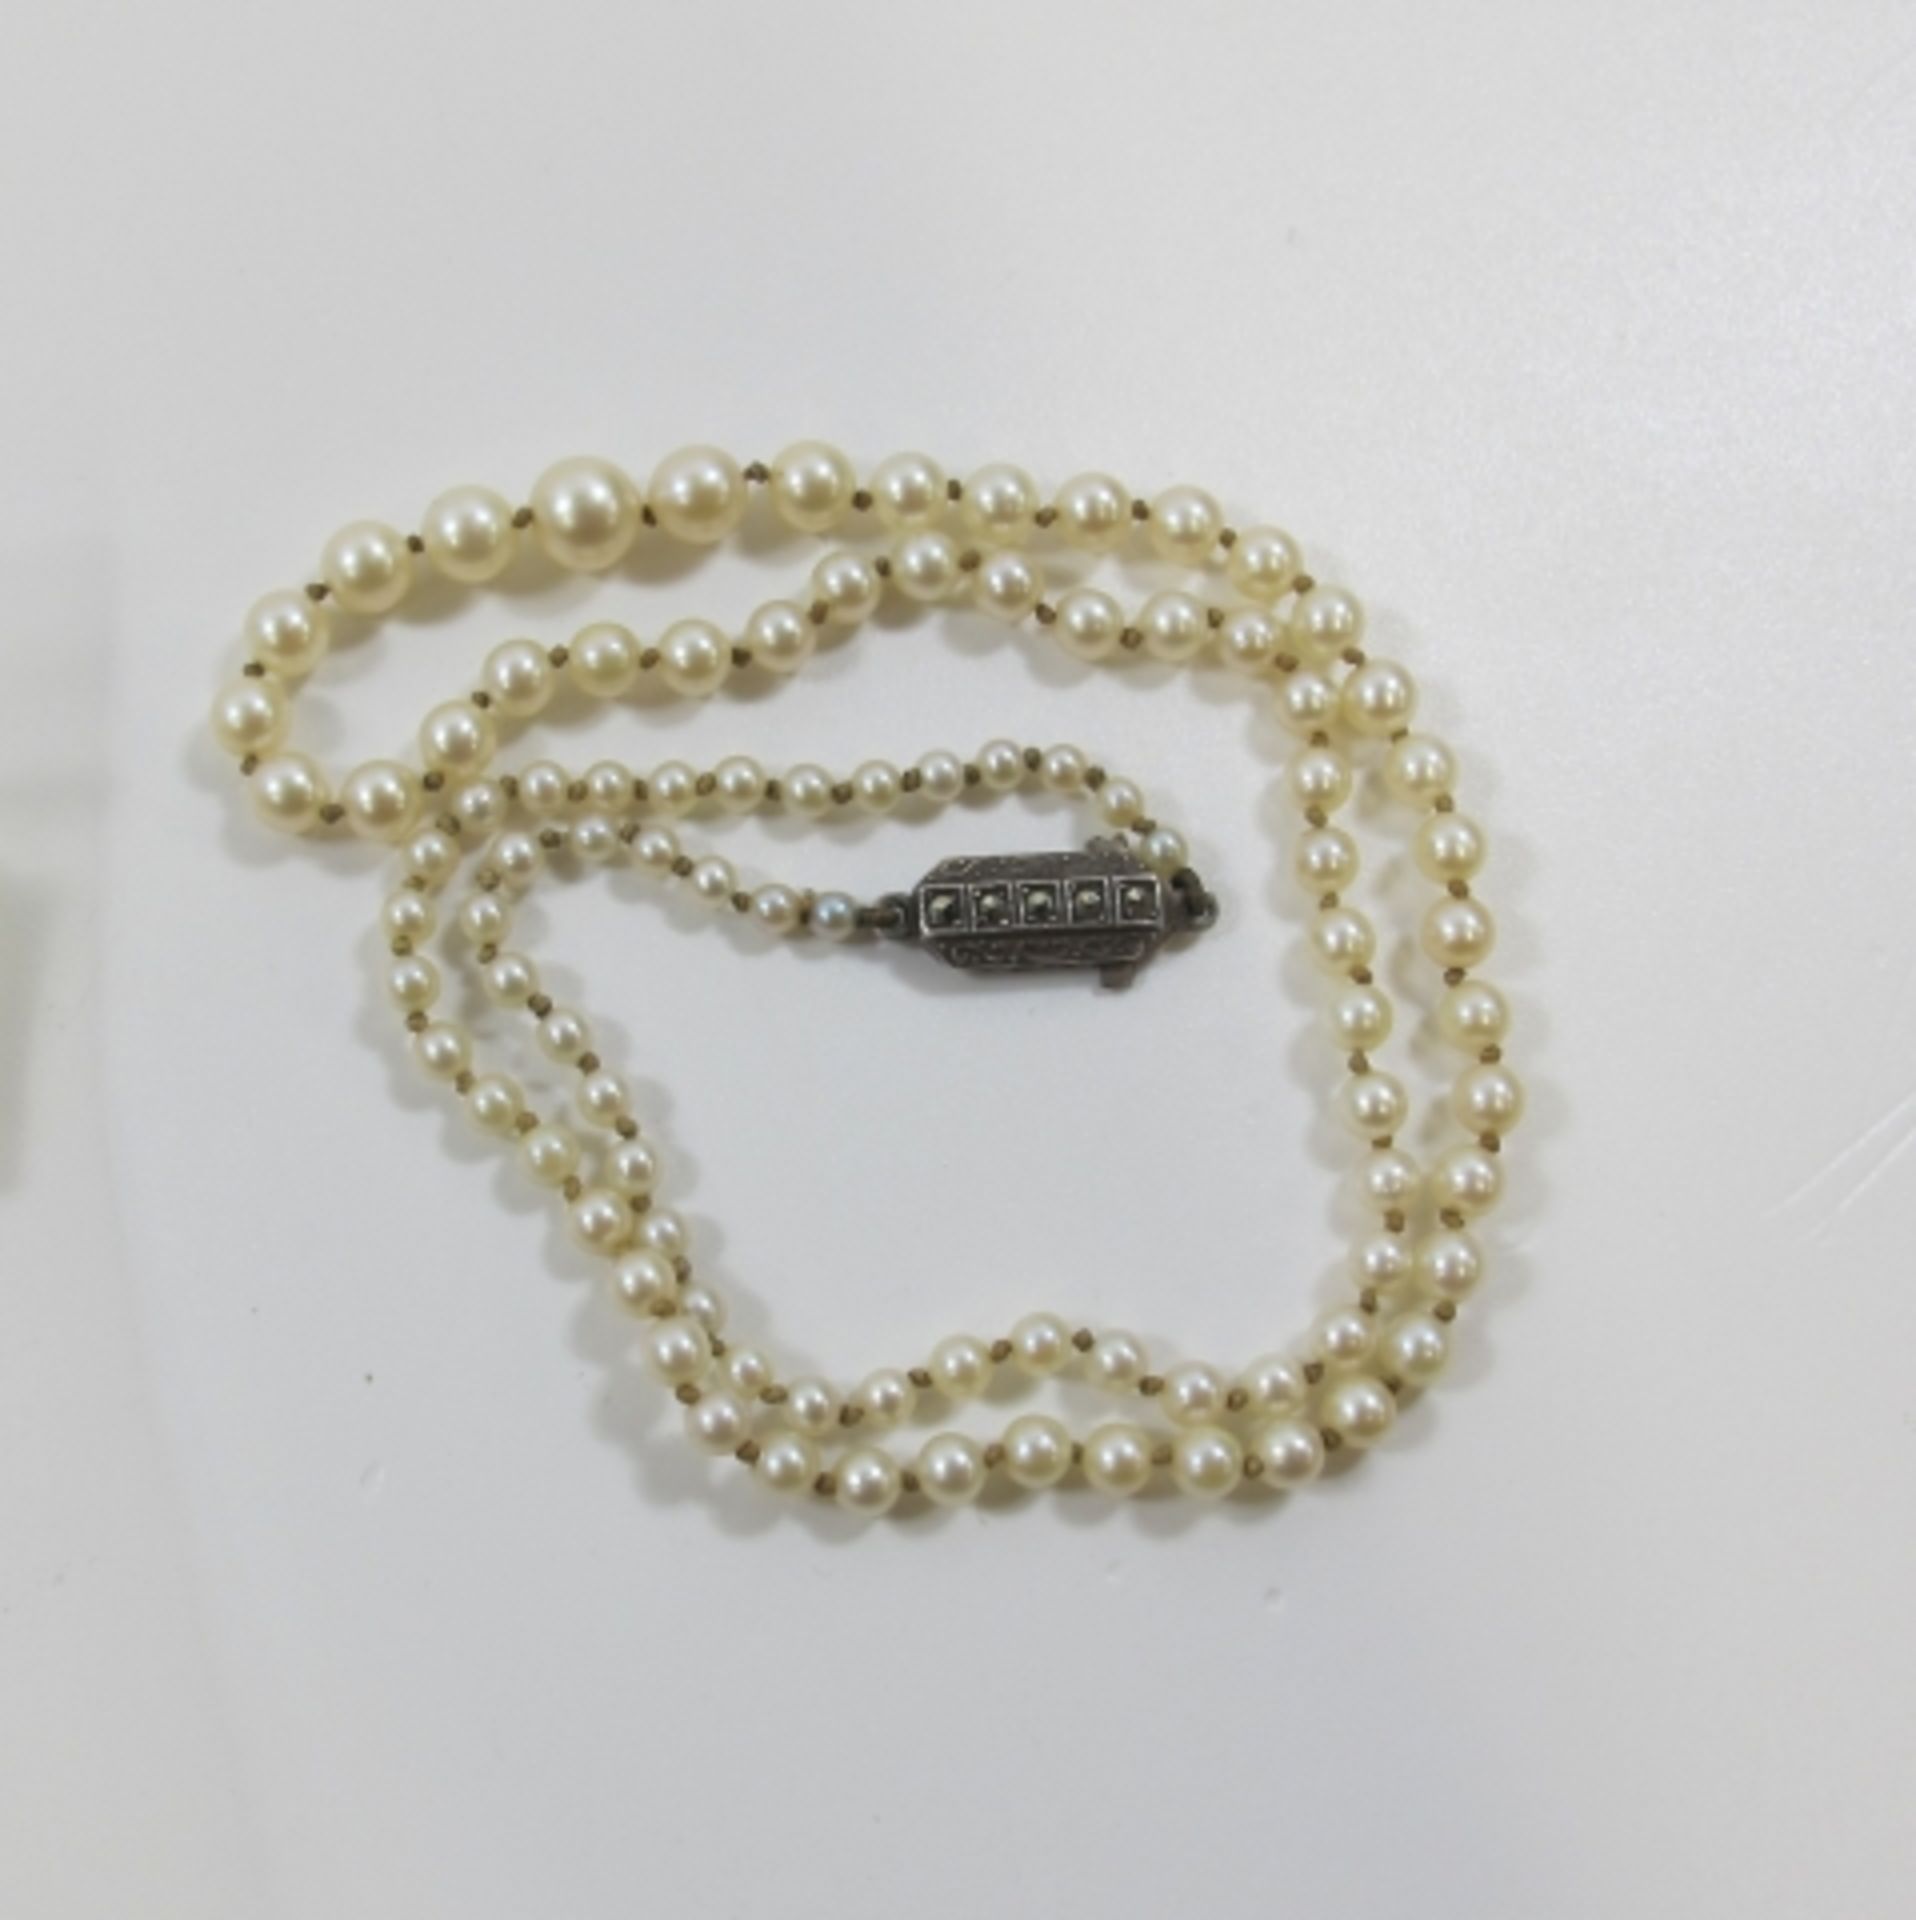 Vintage cultured Pearl necklace with Silver & Marcasite clasp (est. £40 - £60)